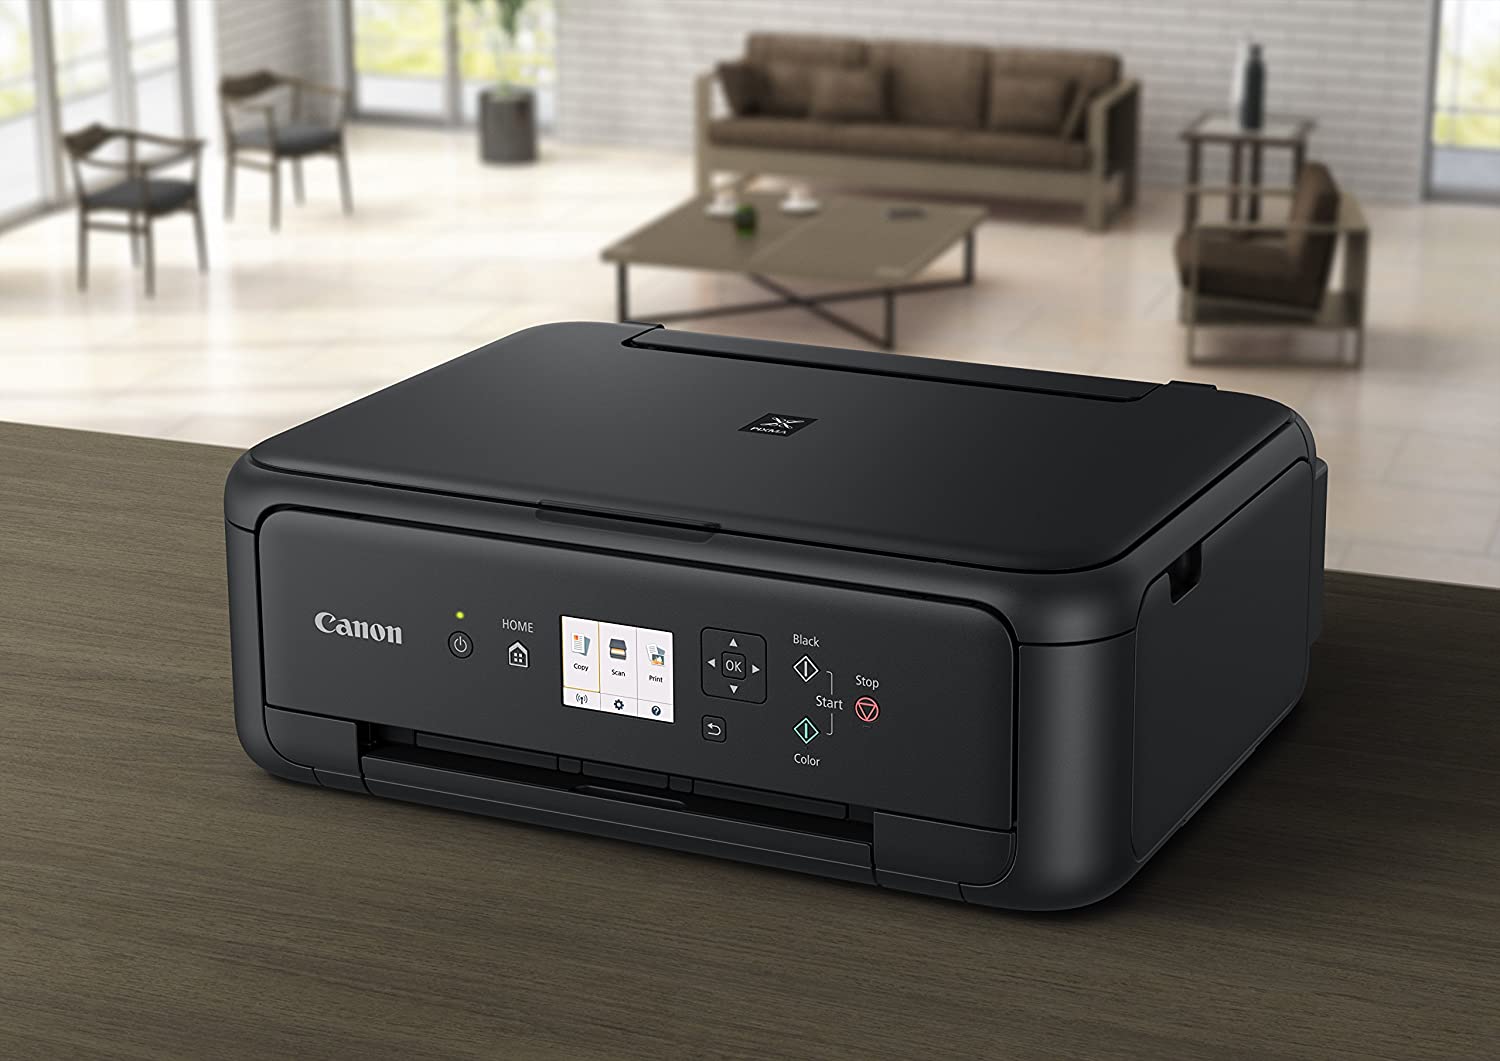 Canon PIXMA TS5120 Wireless All-In-One Mobile and Tablet Printing Printer with Scanner and Copier, Black - image 2 of 3